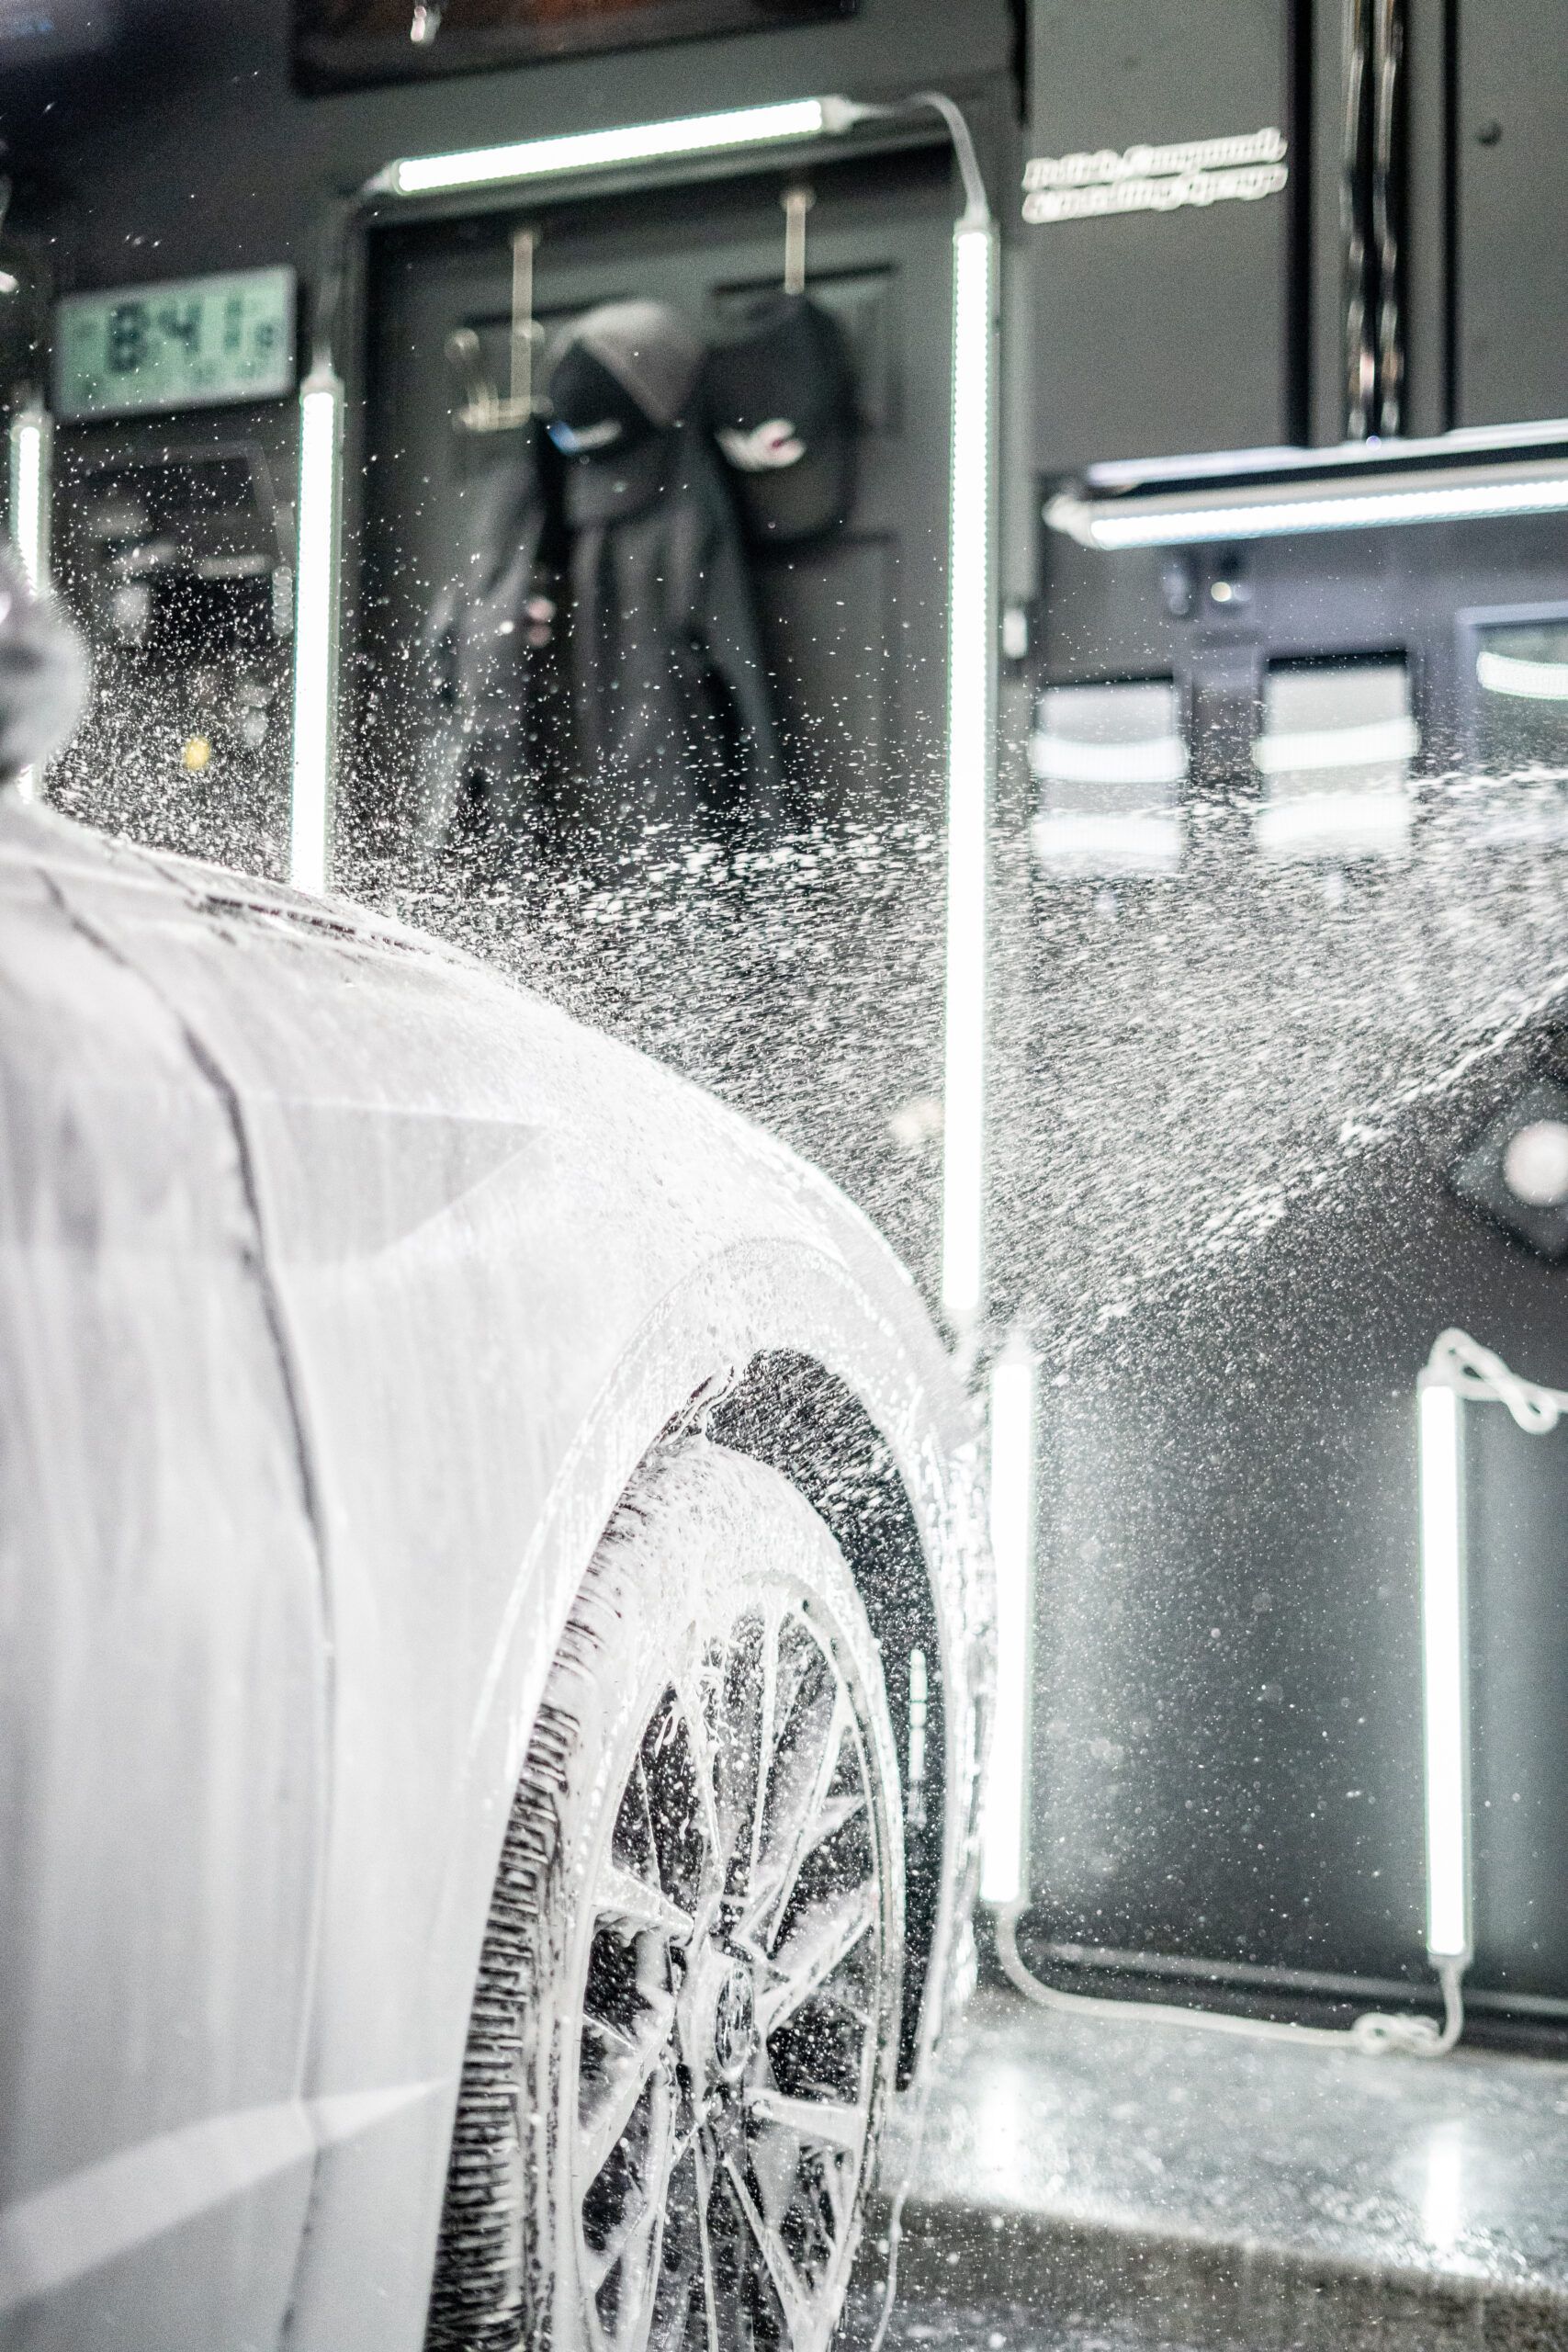 A car is being washed with foam in a car wash.